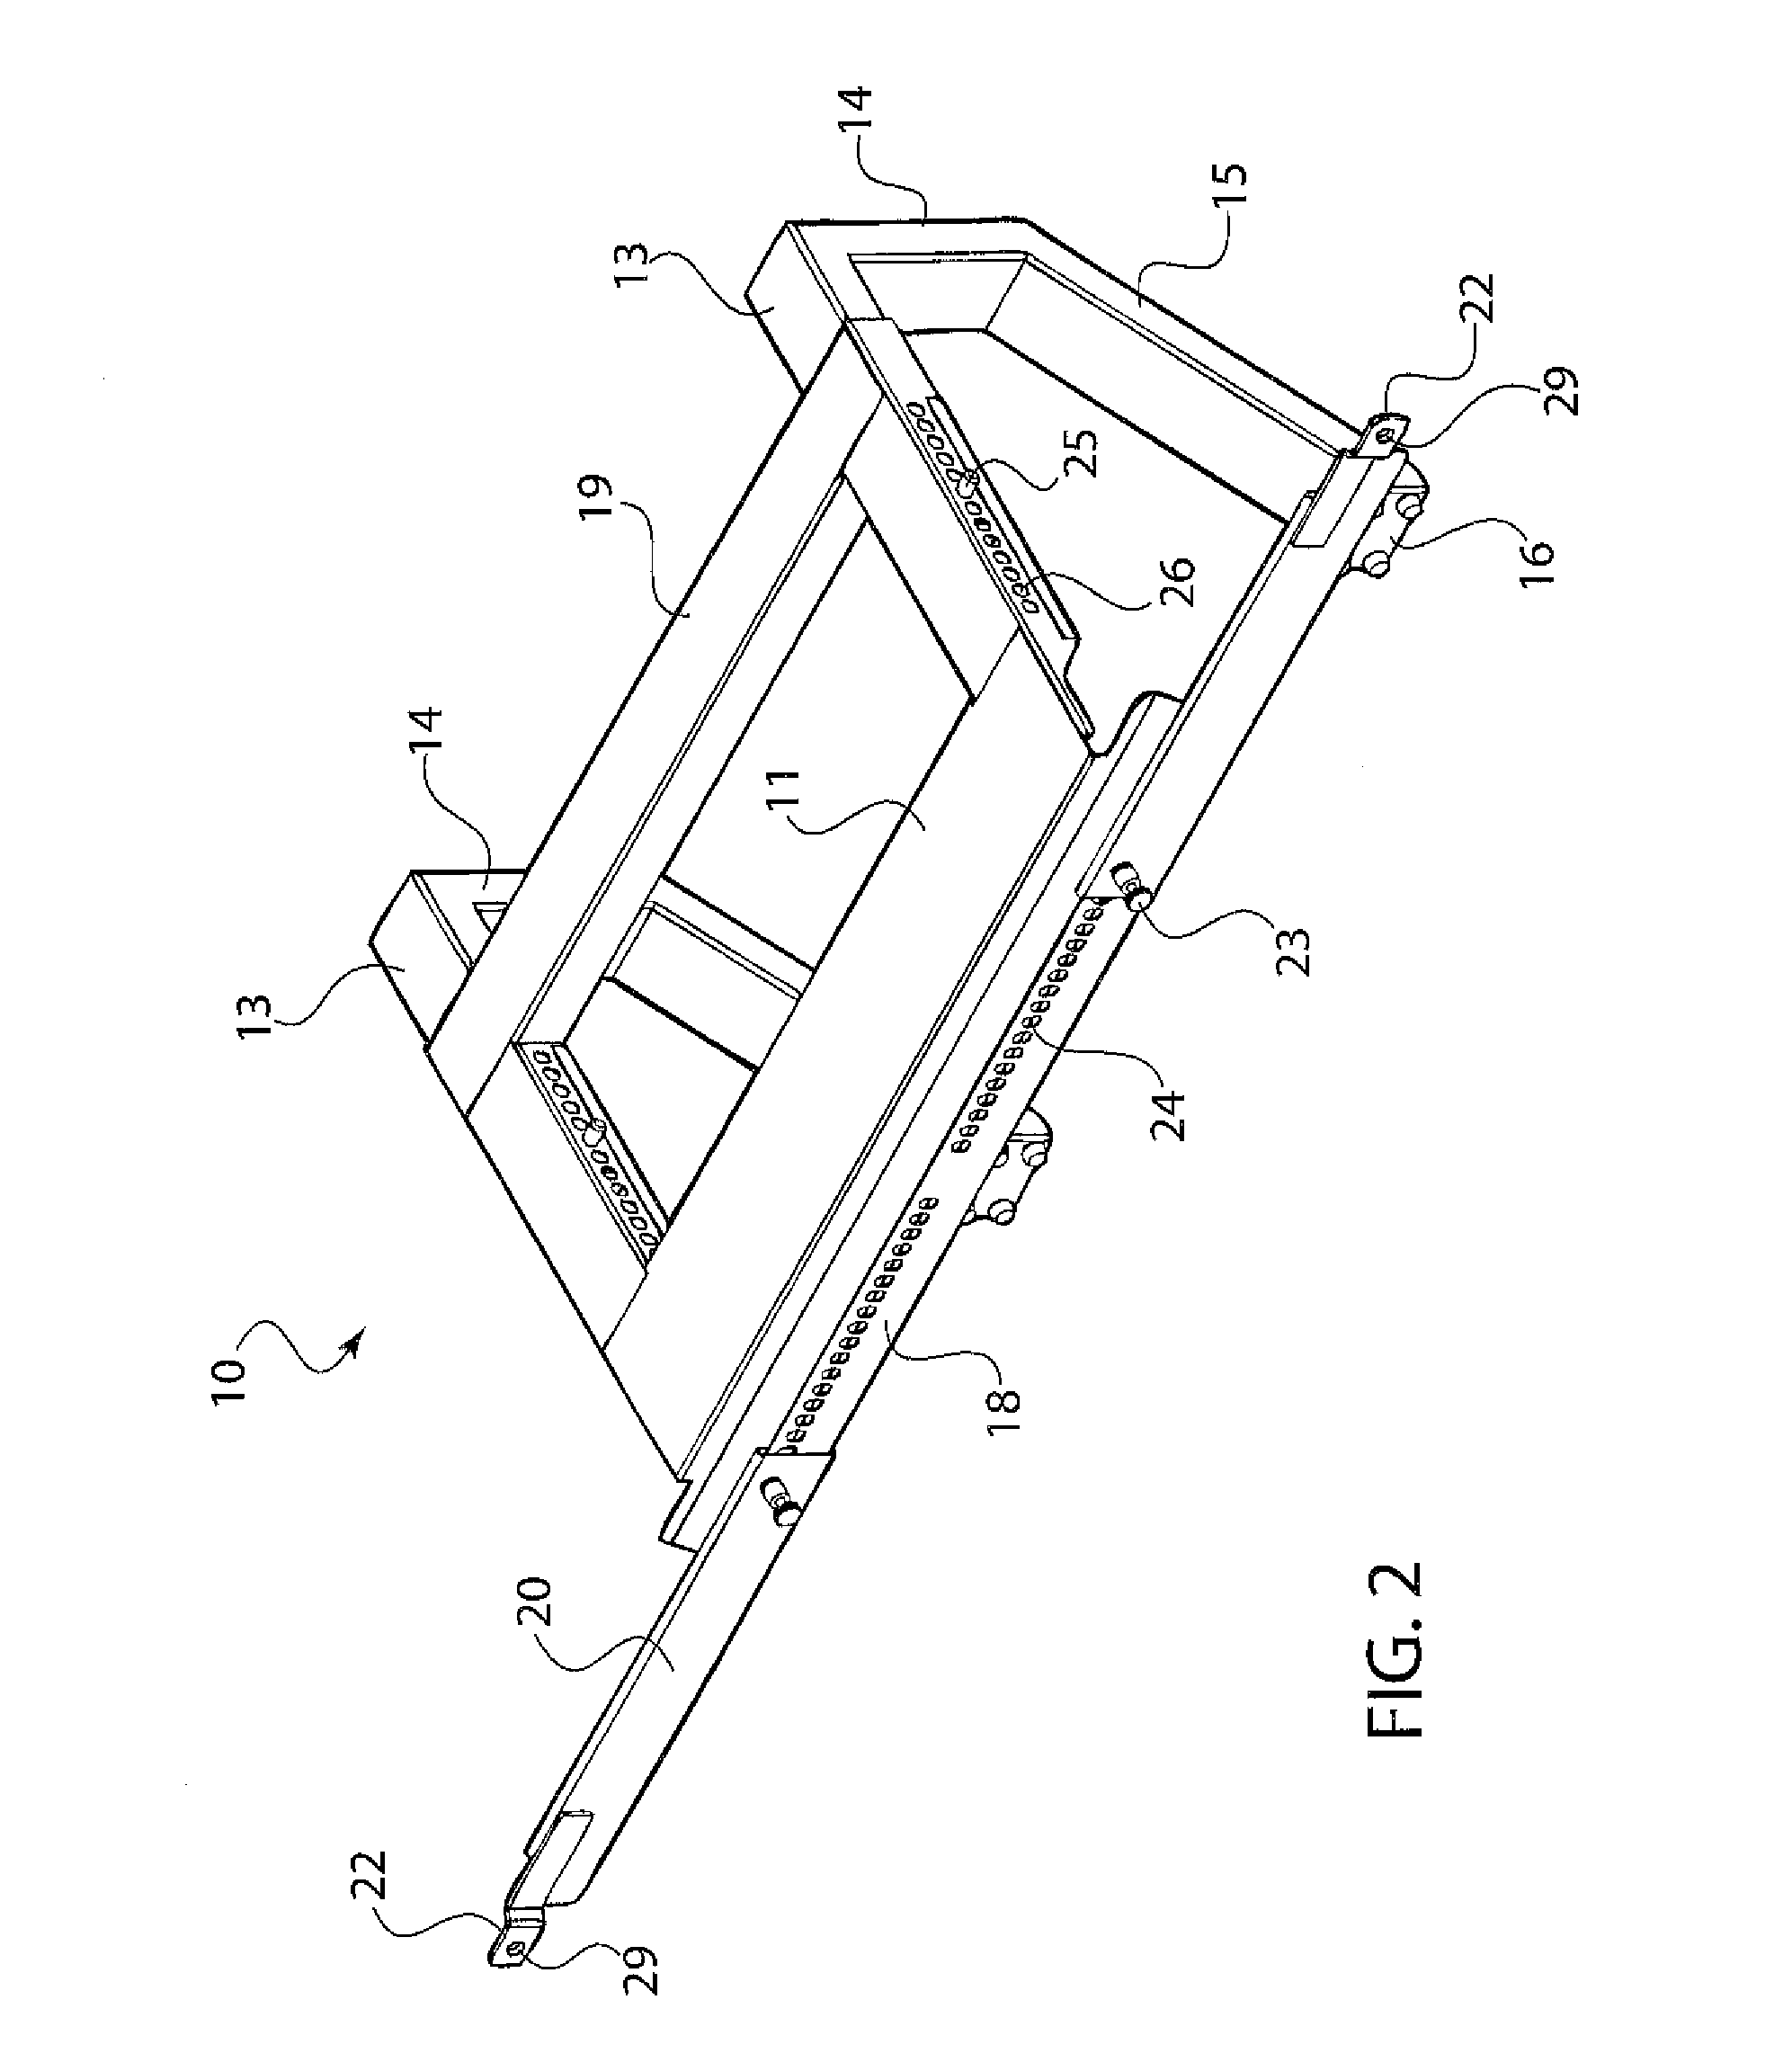 Window support and method for room air conditioner installation